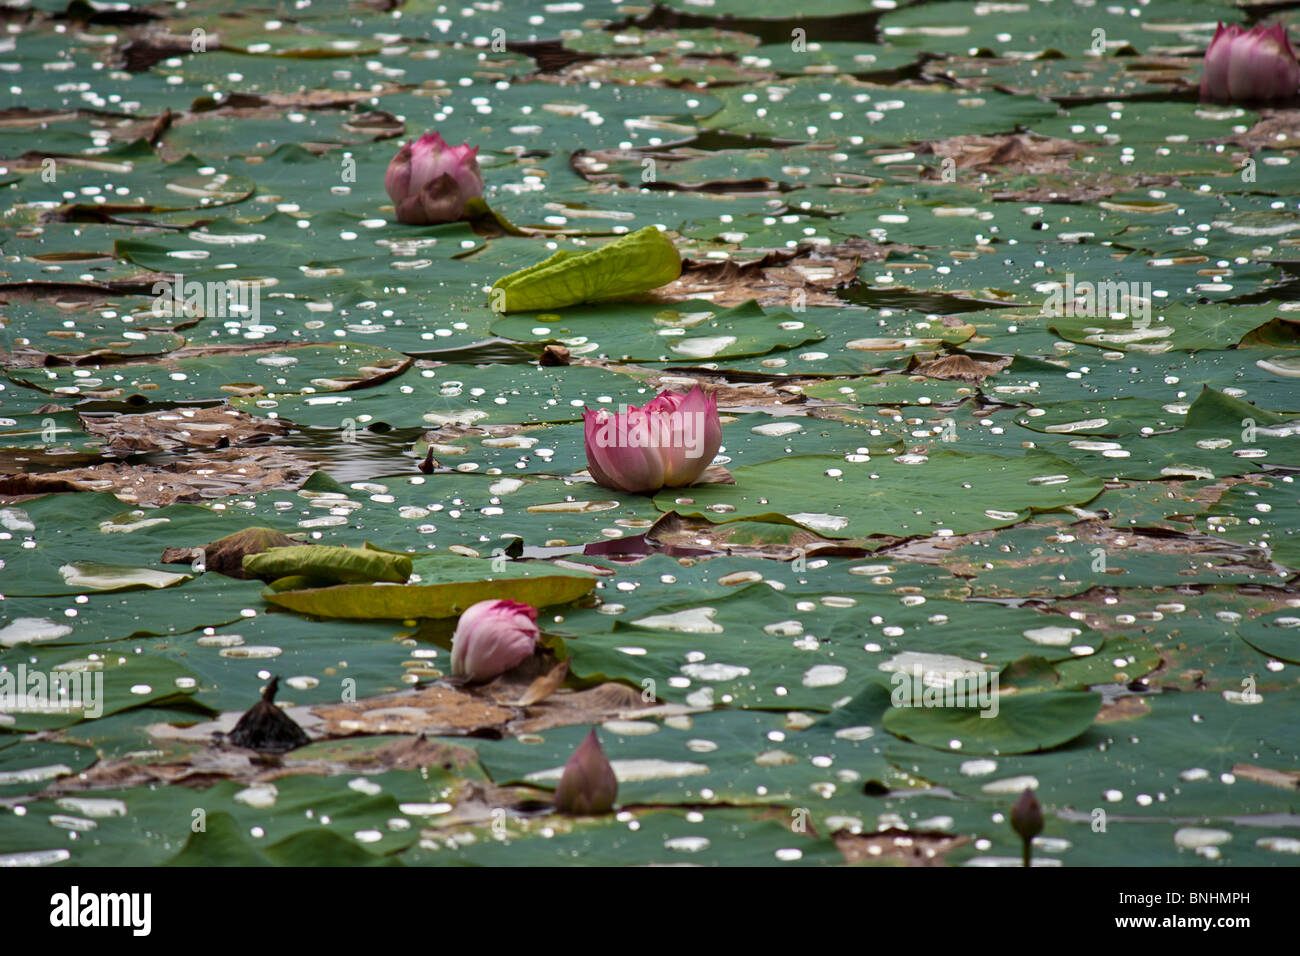 Lotus pond with leaves on water Stock Photo